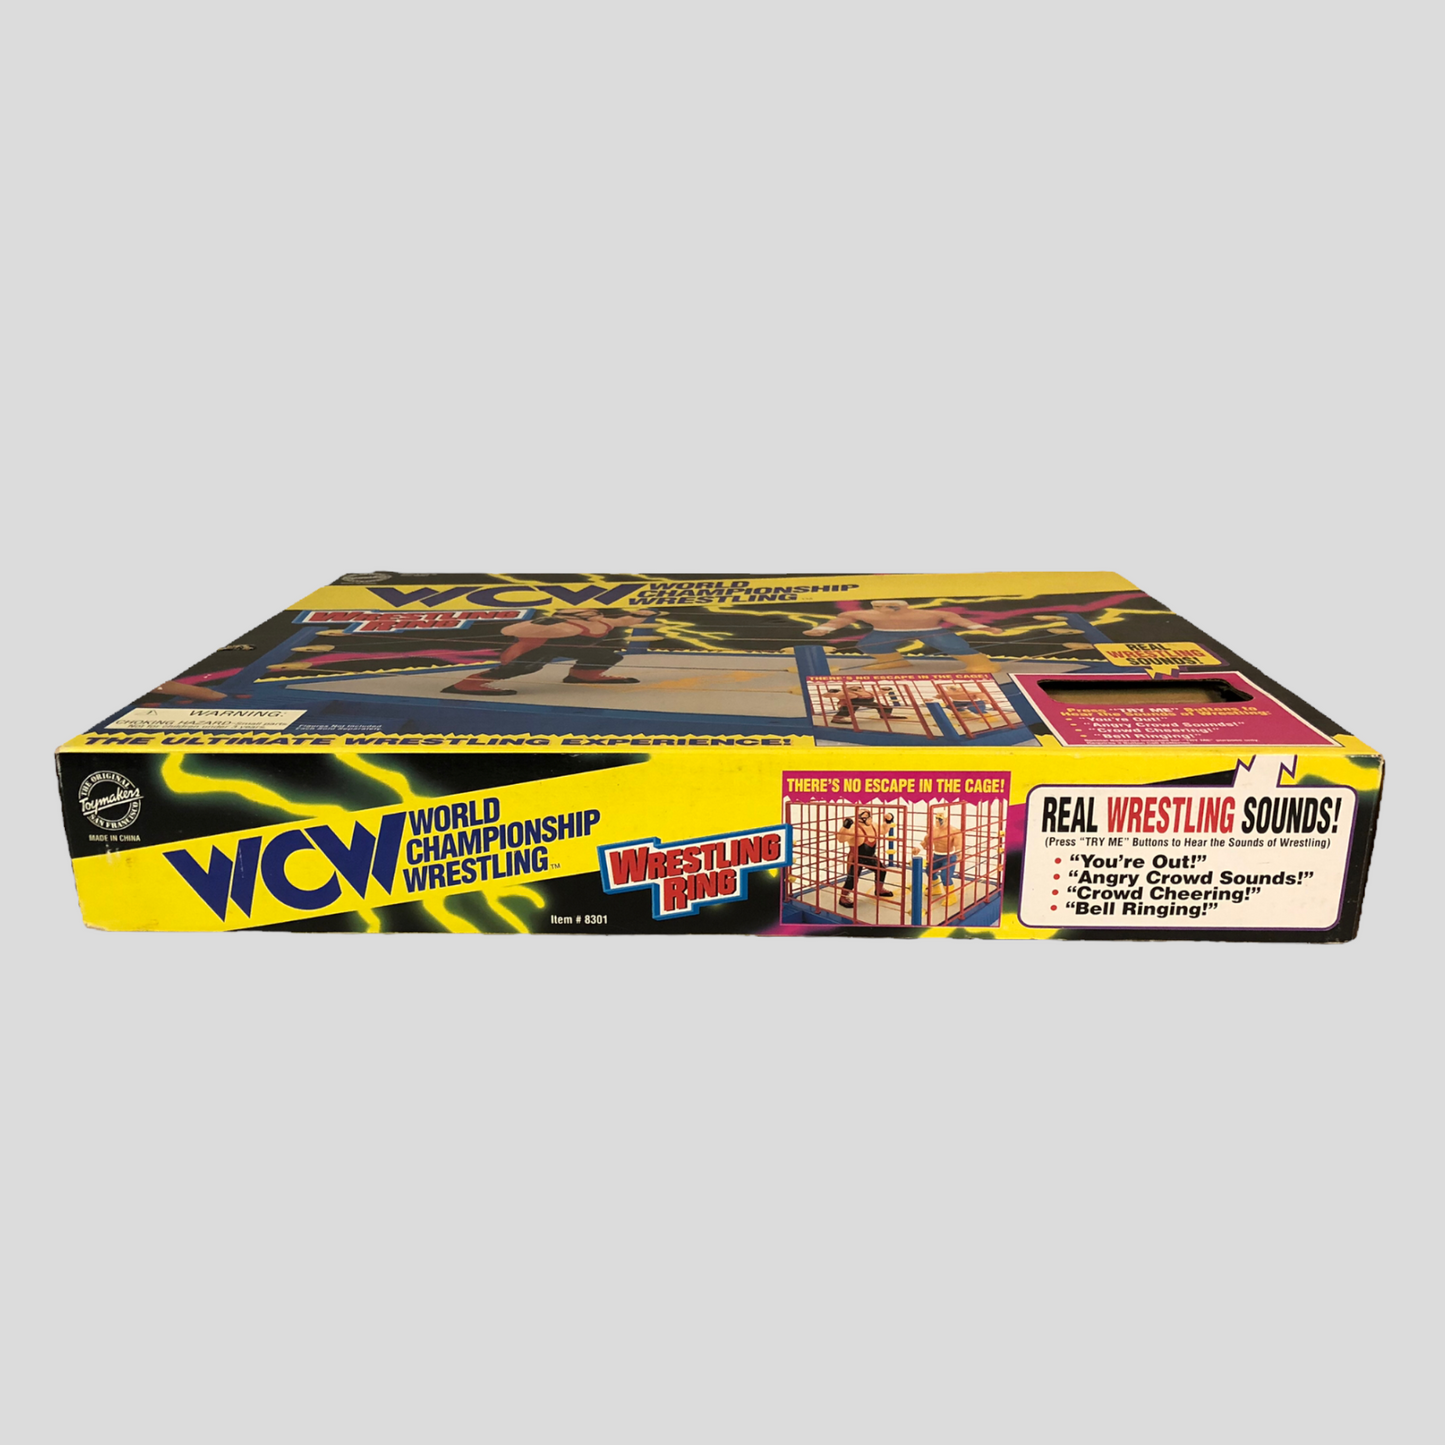 1995 WCW OSFTM Collectible Wrestlers [LJN Style] Wrestling Ring